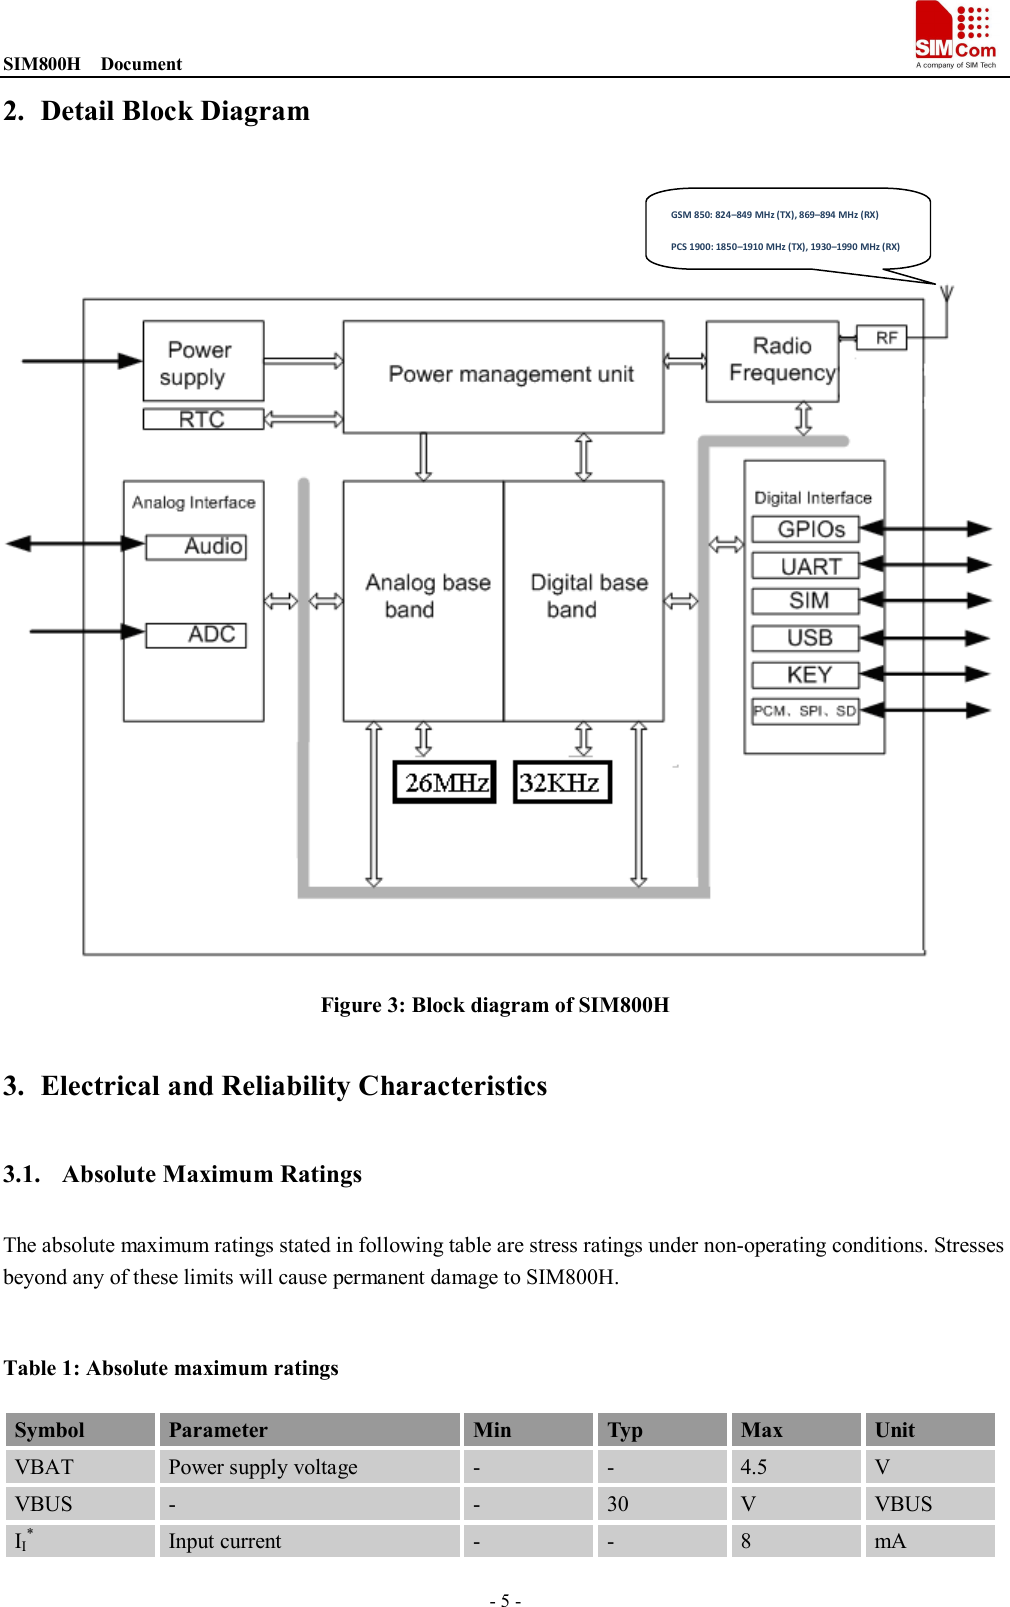 SIM800H    Document                                                                                   - 5 - 2. Detail Block Diagram      Figure 3: Block diagram of SIM800H  3. Electrical and Reliability Characteristics 3.1. Absolute Maximum Ratings The absolute maximum ratings stated in following table are stress ratings under non-operating conditions. Stresses beyond any of these limits will cause permanent damage to SIM800H.  Table 1: Absolute maximum ratings Symbol  Parameter  Min  Typ  Max  Unit VBAT  Power supply voltage  -  -  4.5  V VBUS  -  -  30  V  VBUS II*  Input current  -  -  8  mA GSM 850: 824–849 MHz (TX), 869–894 MHz (RX) PCS 1900: 1850–1910 MHz (TX), 1930–1990 MHz (RX) 